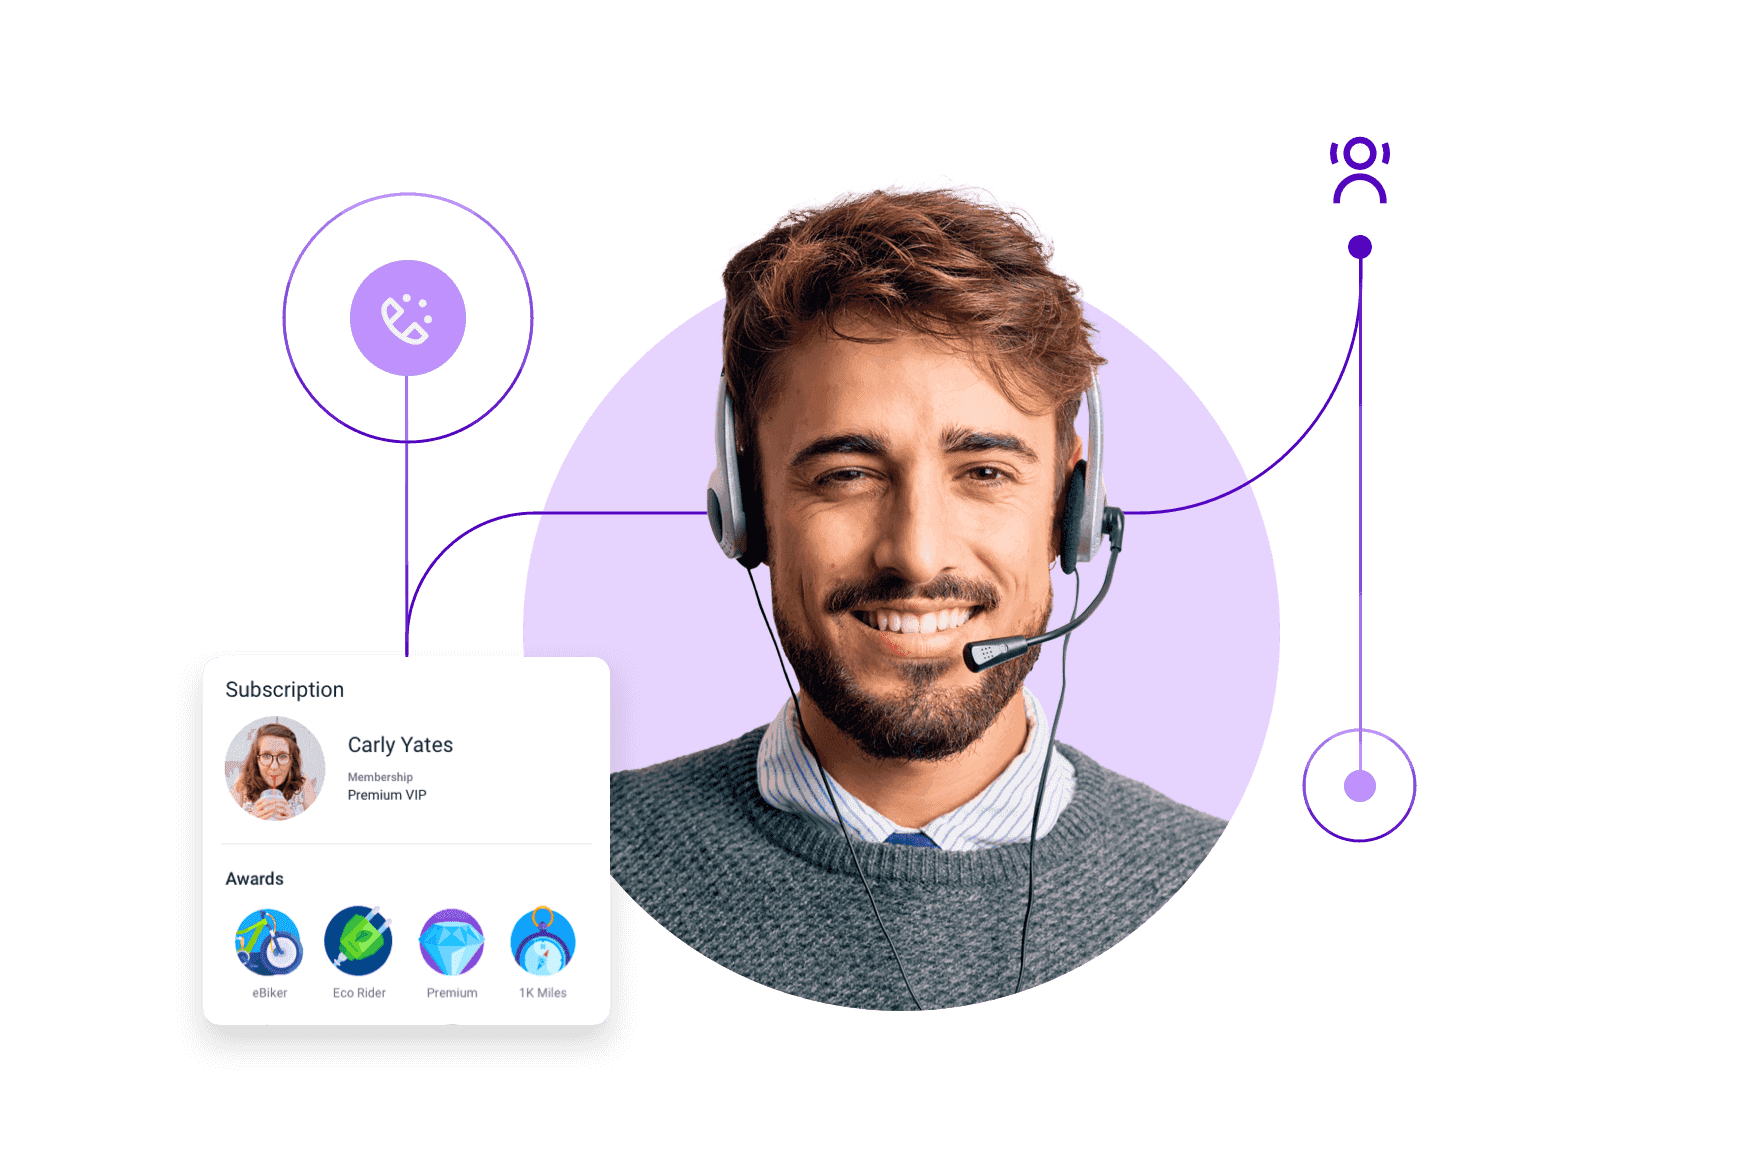 Experience the Talkdesk AI-powered cloud contact center platform with concise, self-guided demos.